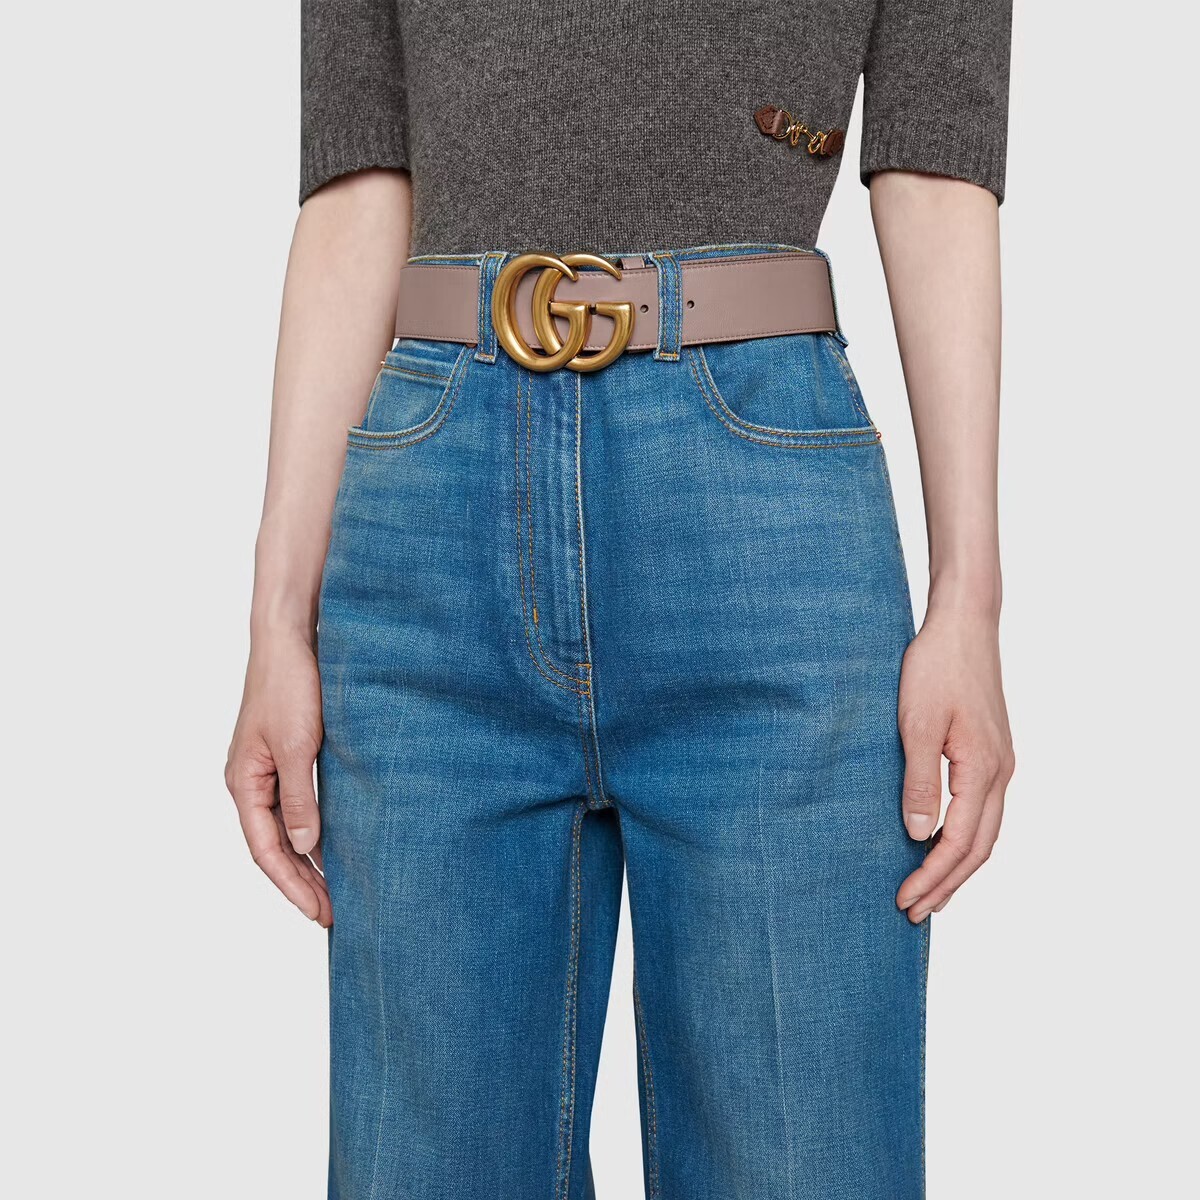 2015 Re Edition Wide Leather Belt in Black - Gucci